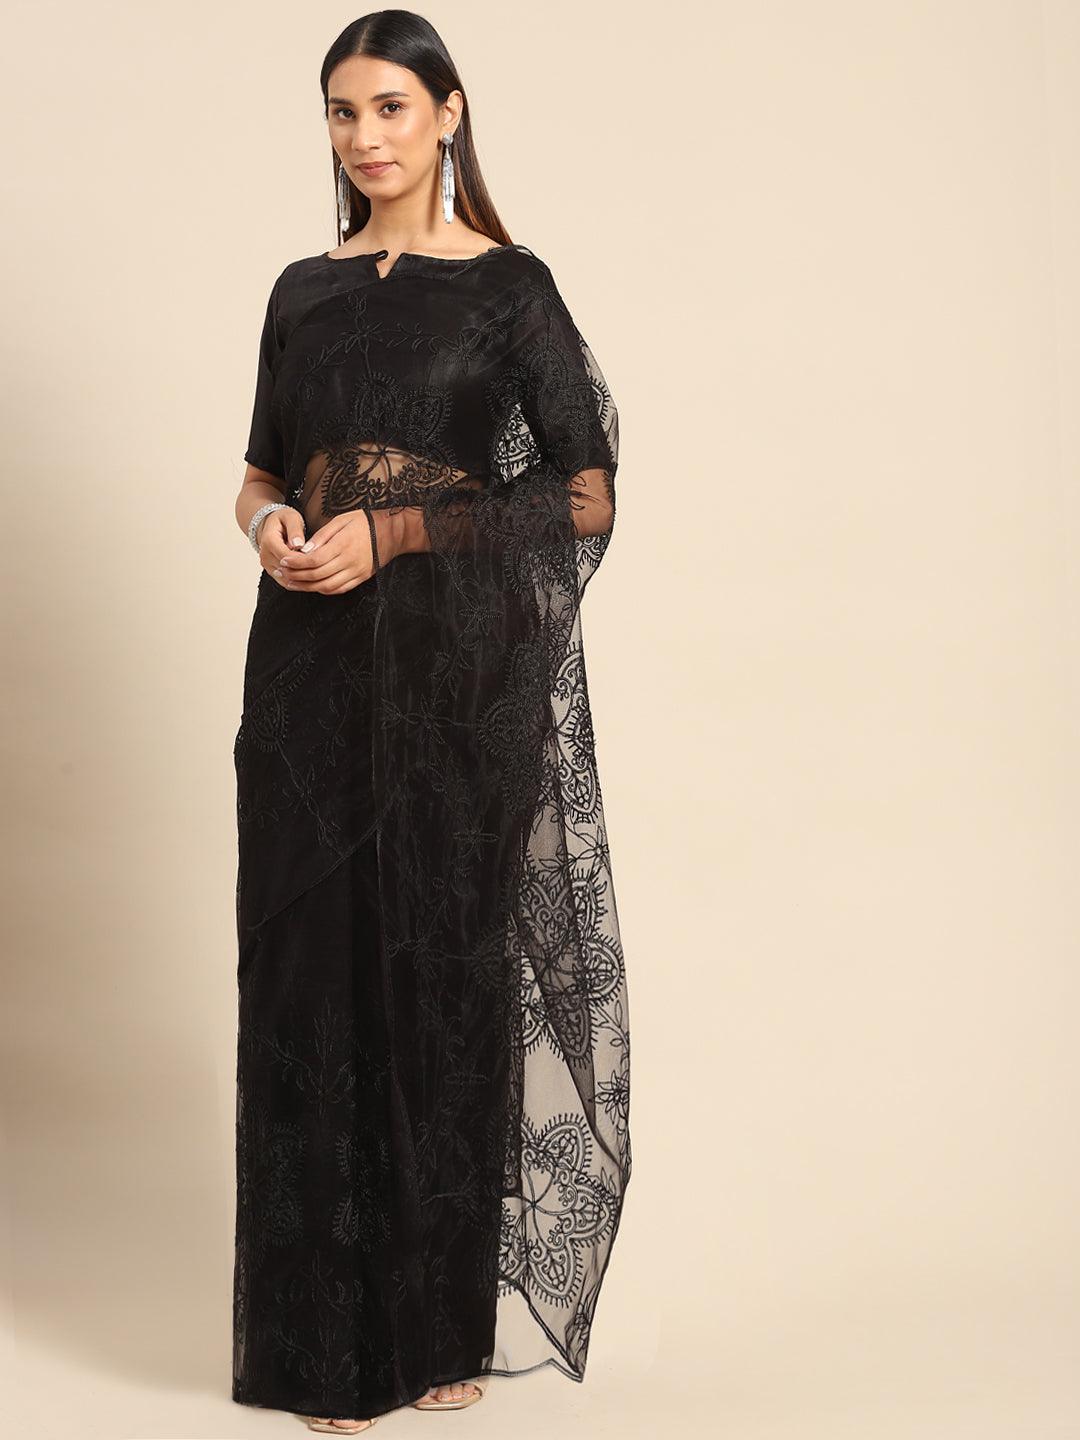 Designer Black Floral Embroidered Net Saree with Blouse Piece - Indiakreations